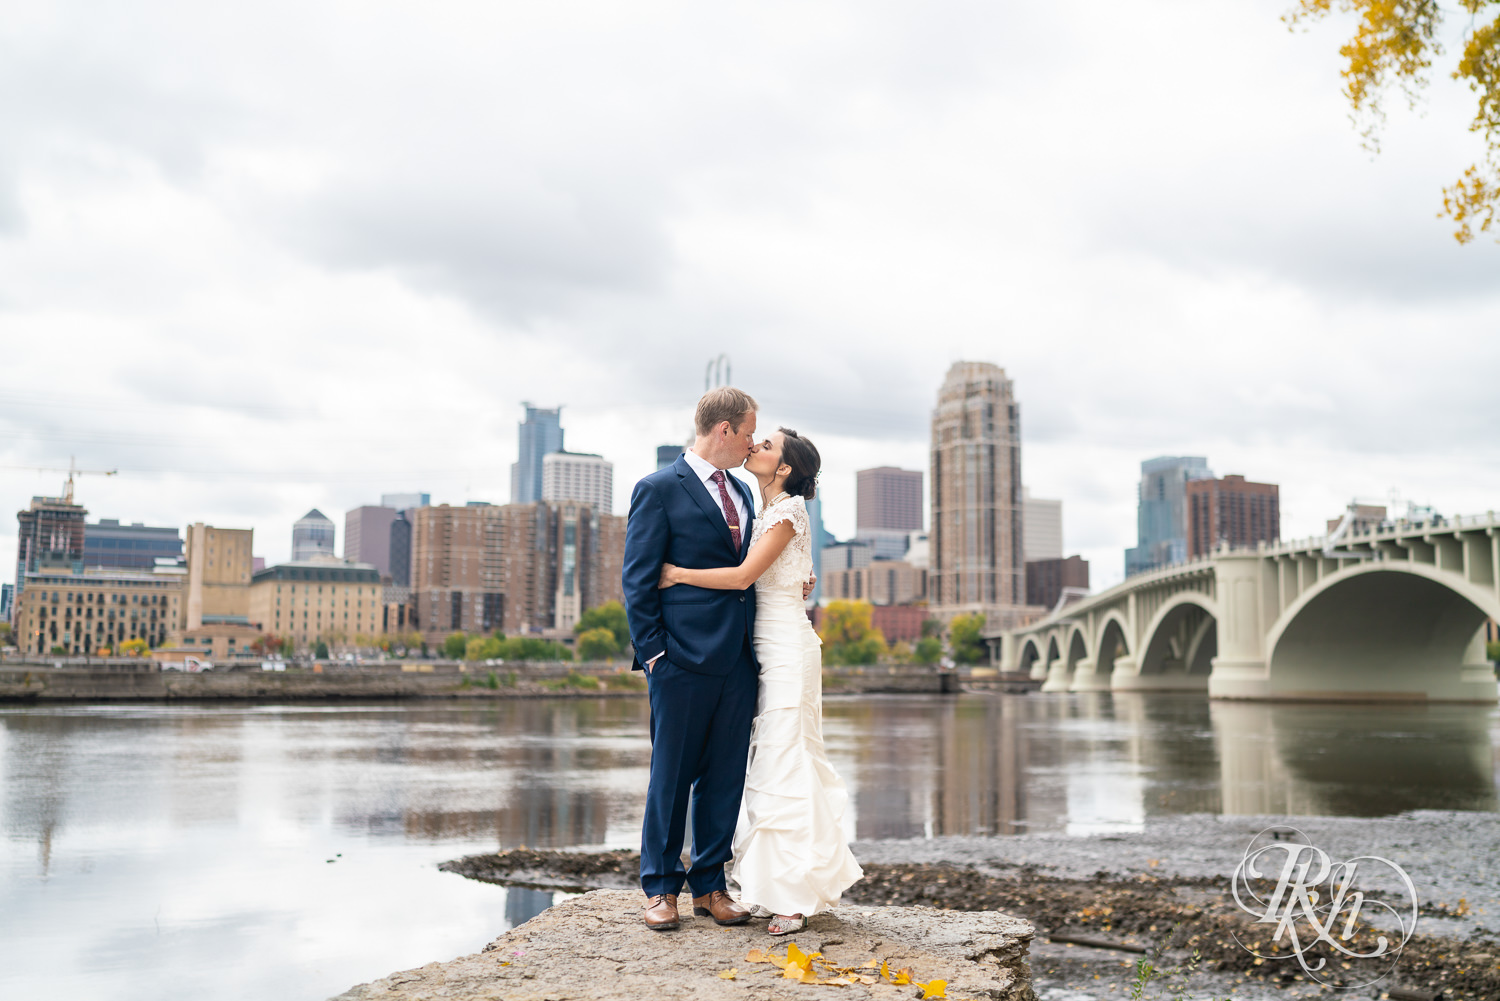 Bride and groom kiss in front of the Minneapolis skyline.